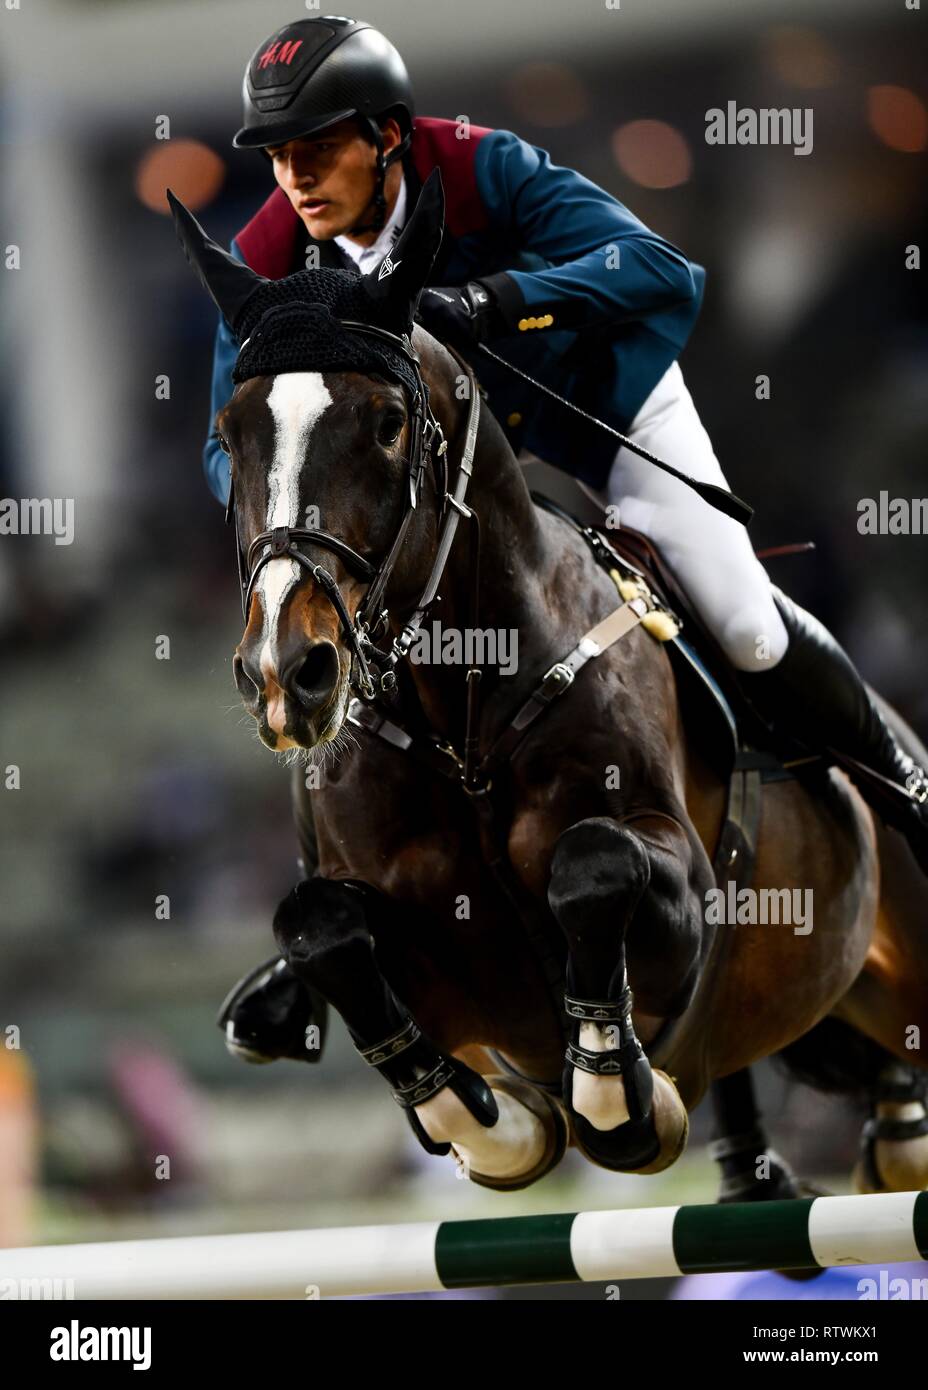 Doha, Qatar. 2nd Mar, 2019. Nicola Philippaerts of Belgium and his horse " H&M Chilli Willi" competes in the CSI5 1.60 meters competition during the  Longines Global Champions Tour of Doha 2019 at